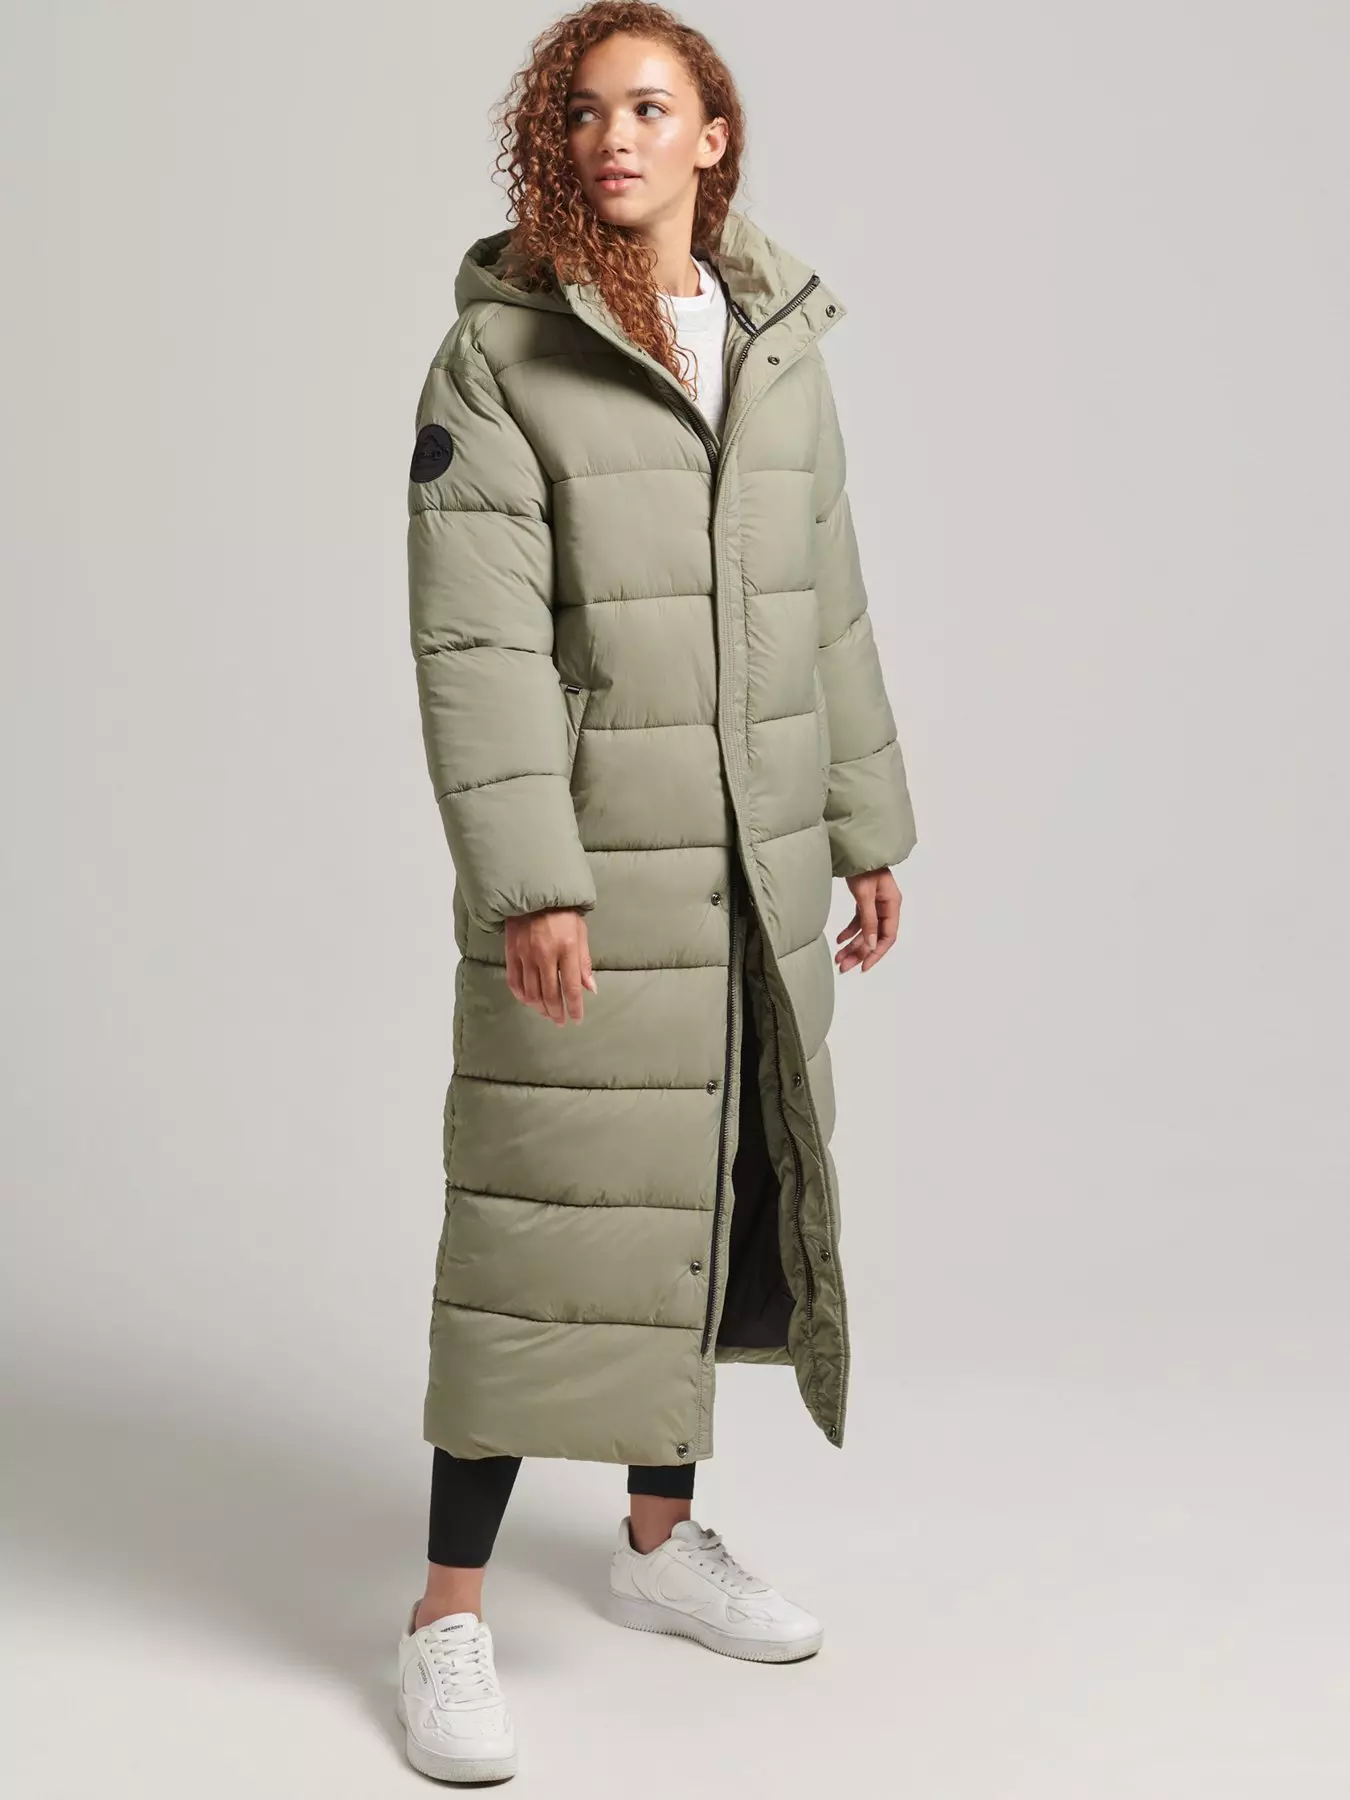 Hooded recycled wool coat, Contemporaine